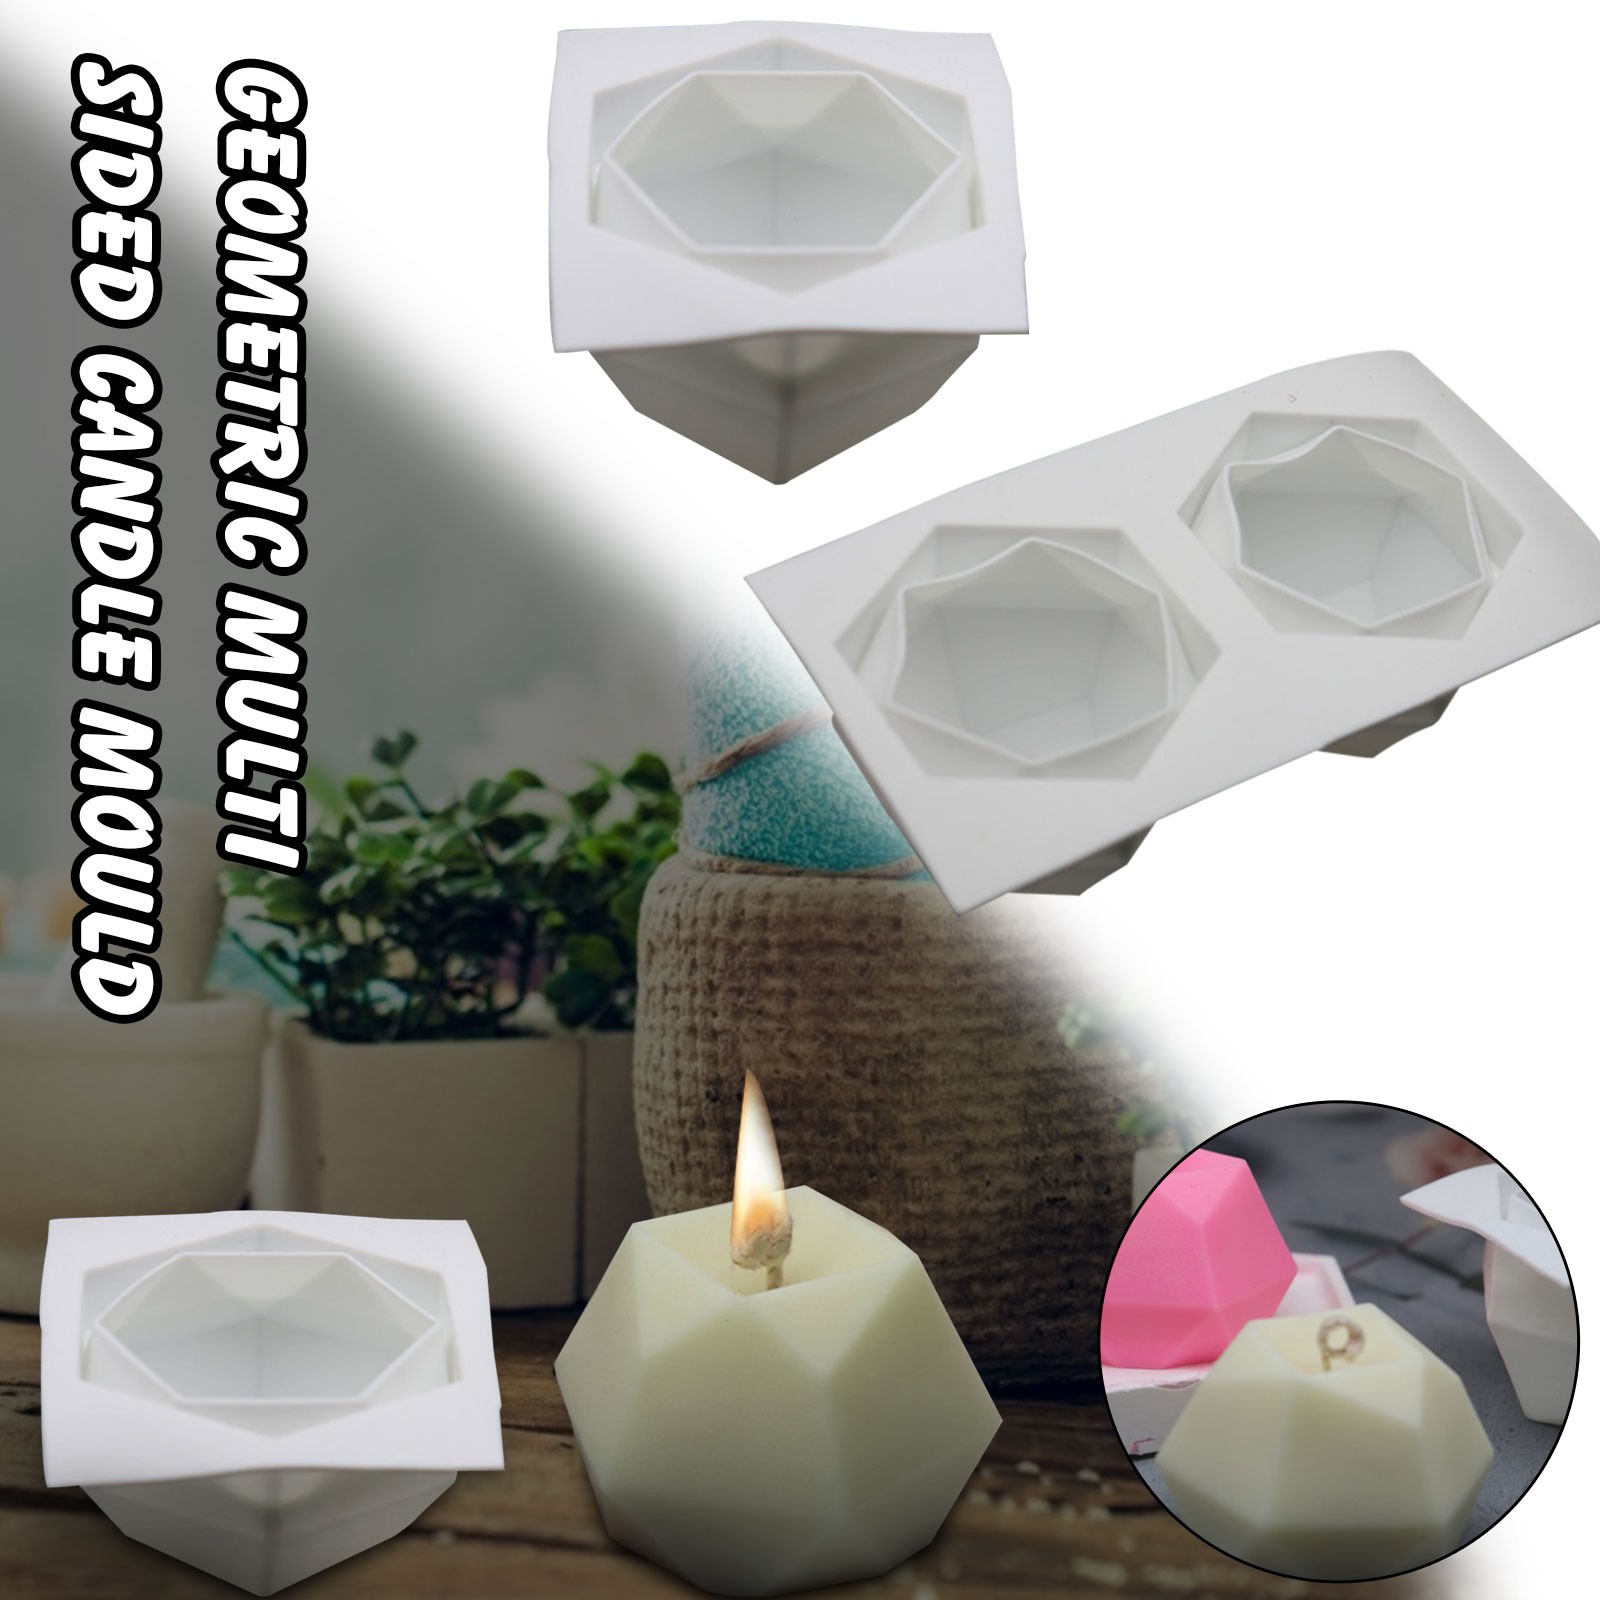 Vikakiooze Promotion on Sale! Silicone Molds DIY Candle Making Mold 3D Silicone  Mold Soy Wax Candle Mold 